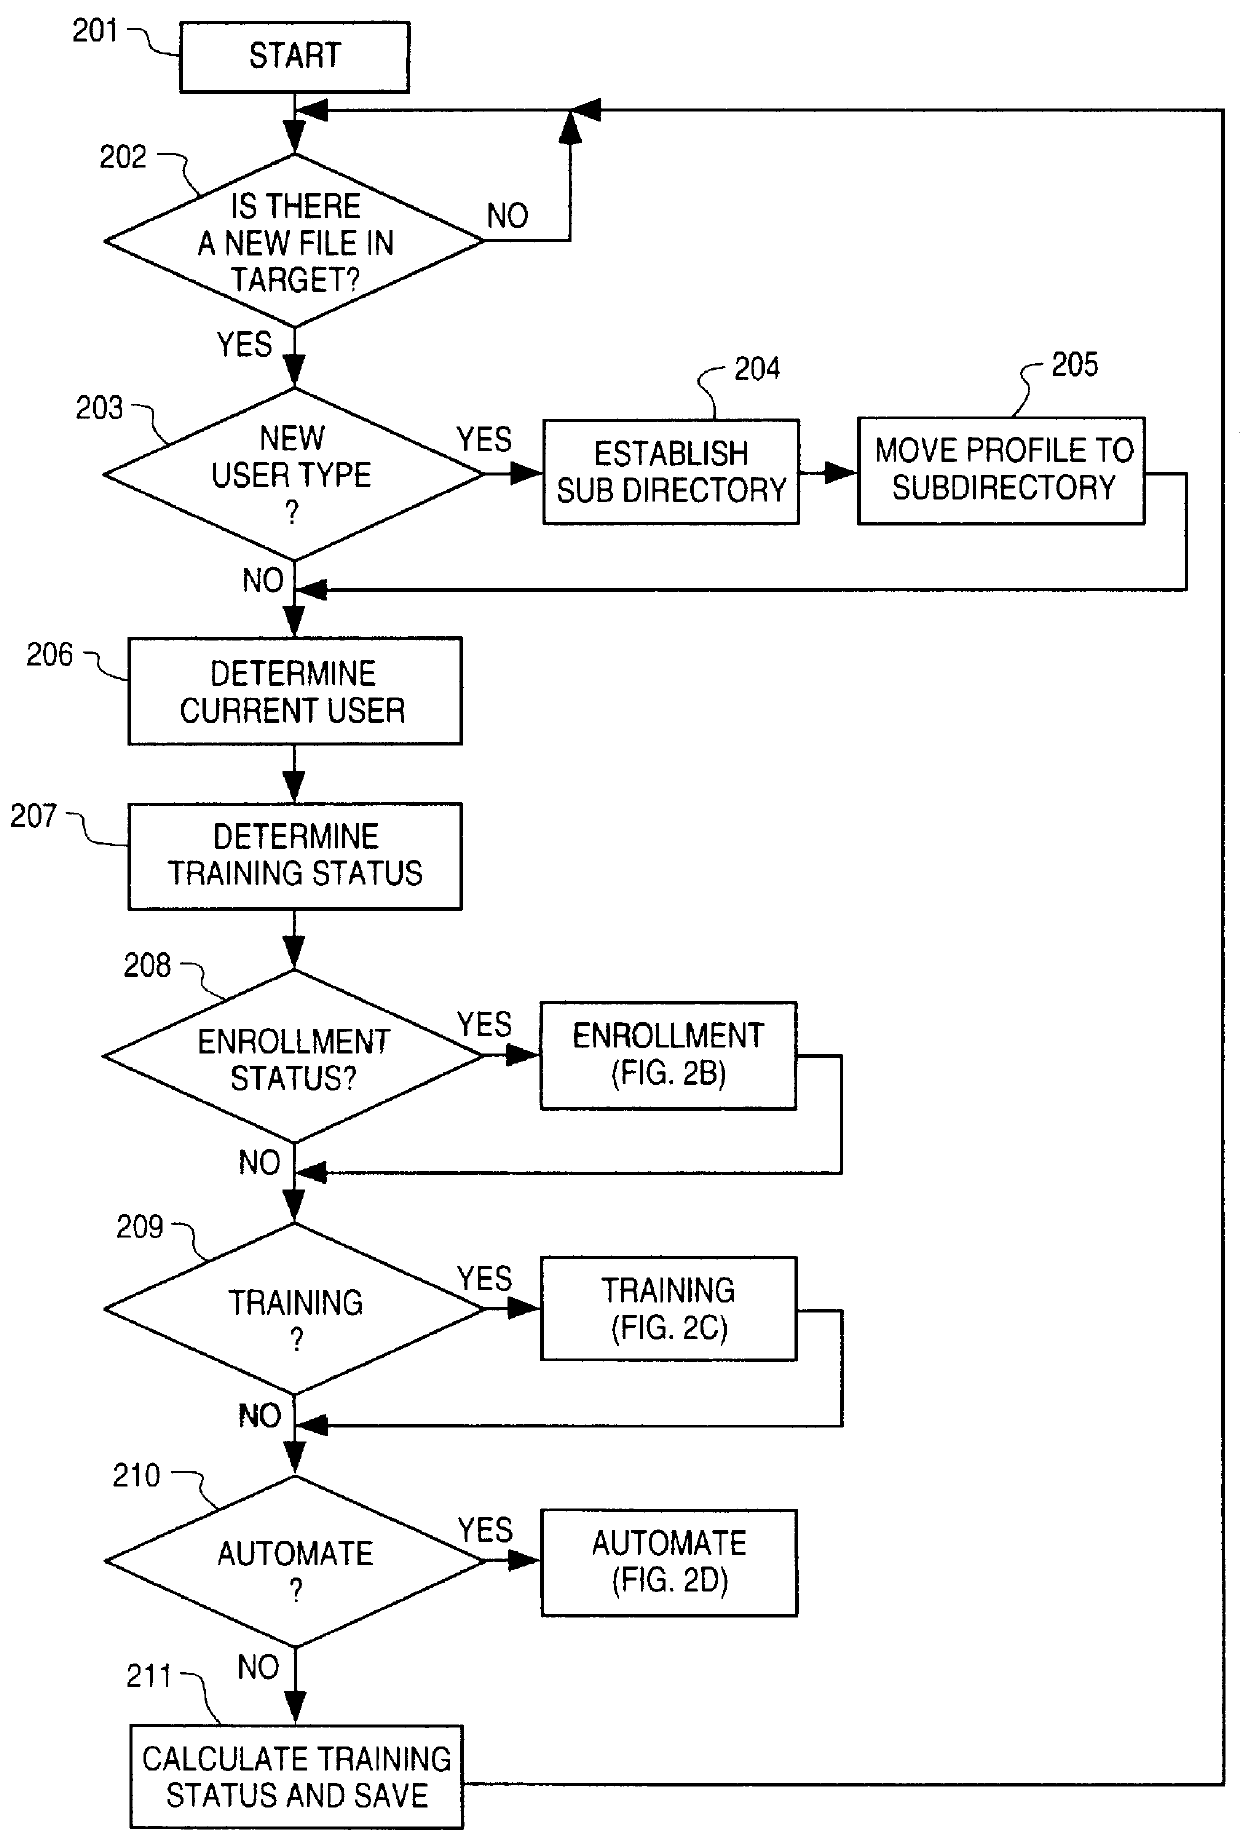 System and method for automating transcription services